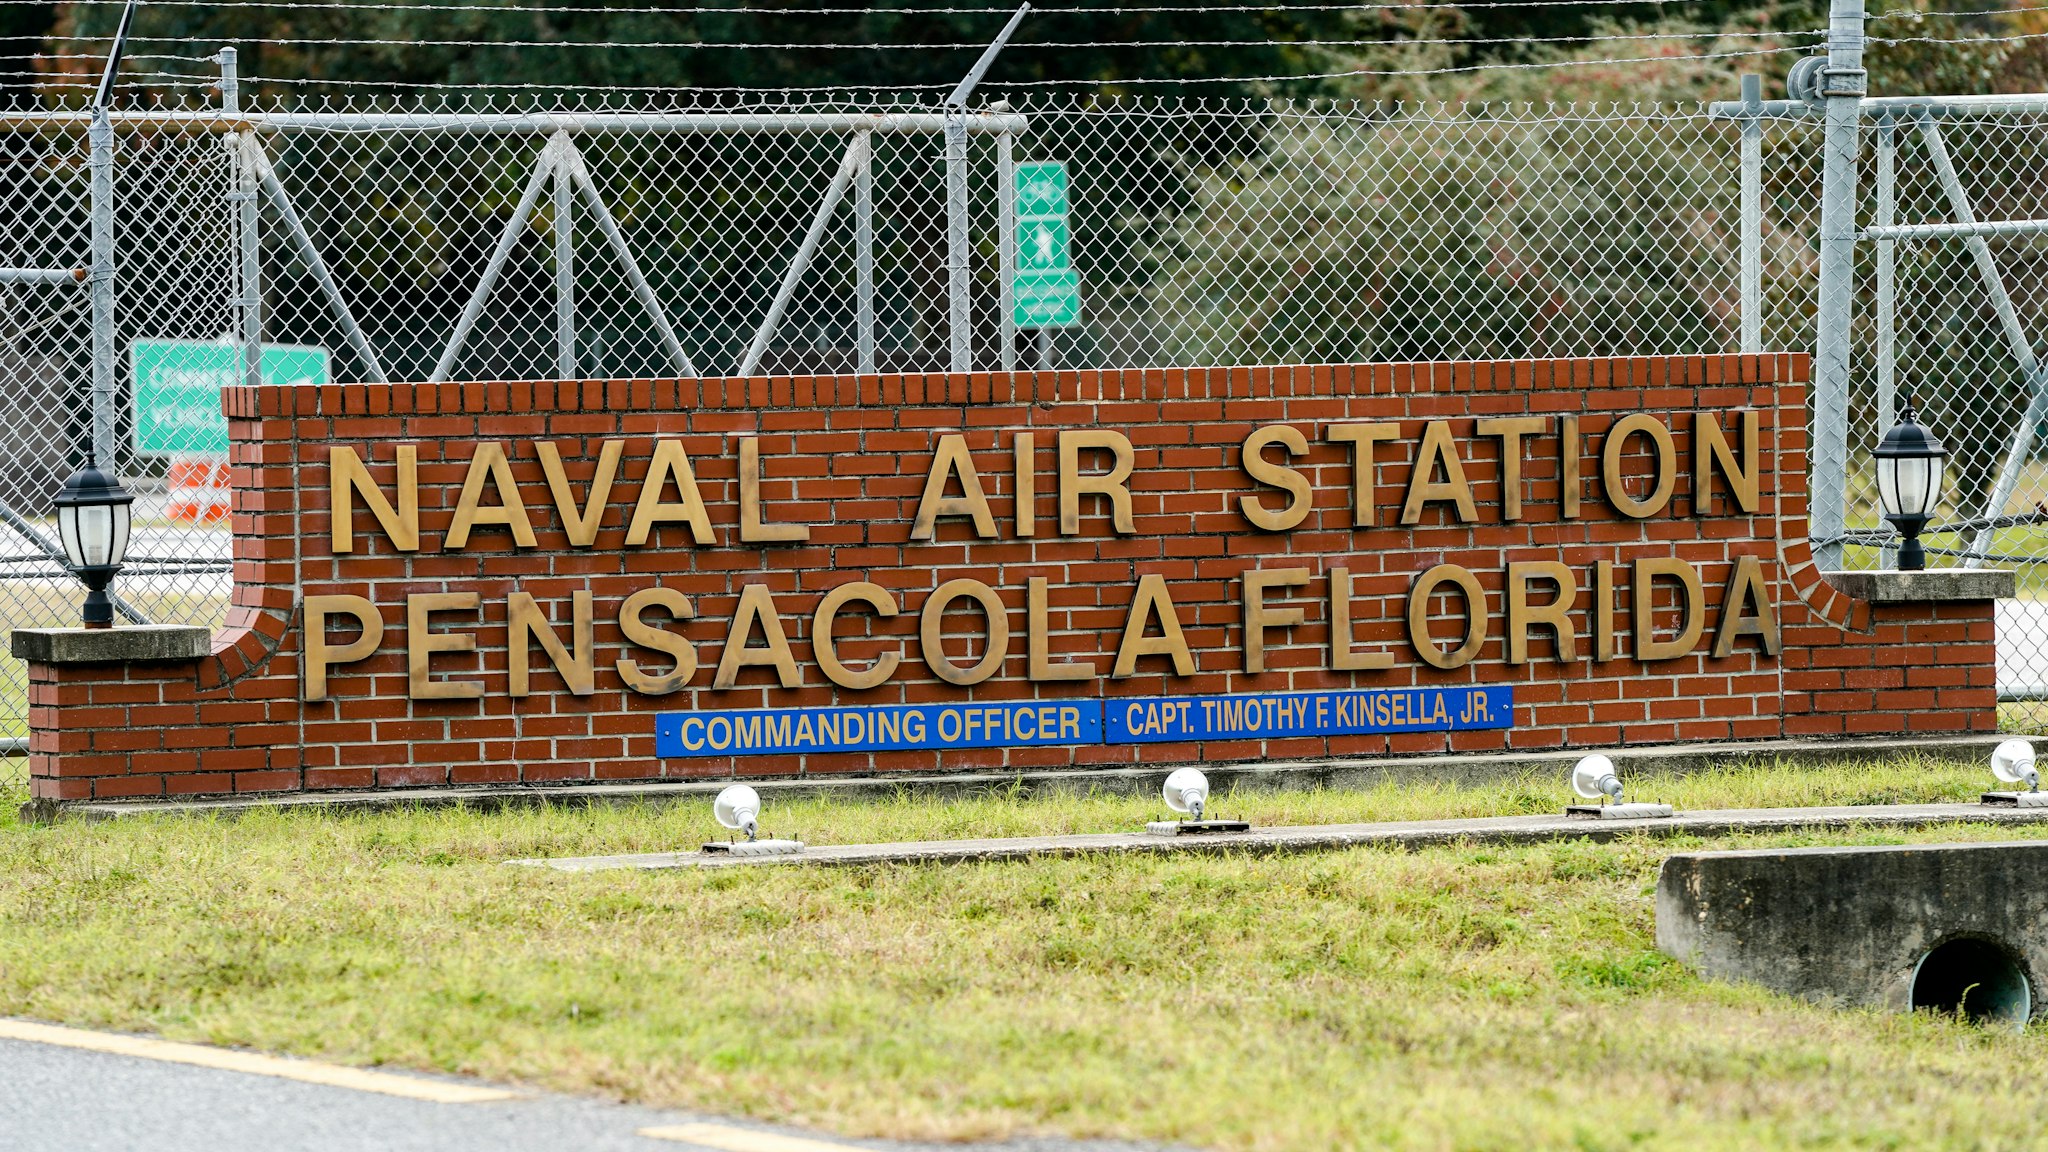 PENSACOLA, FLORIDA - DECEMBER 06: A general view of the atmosphere at the Pensacola Naval Air Station following a shooting on December 06, 2019 in Pensacola, Florida. The second shooting on a U.S. Naval Base in a week has left three dead plus the suspect and seven people wounded.